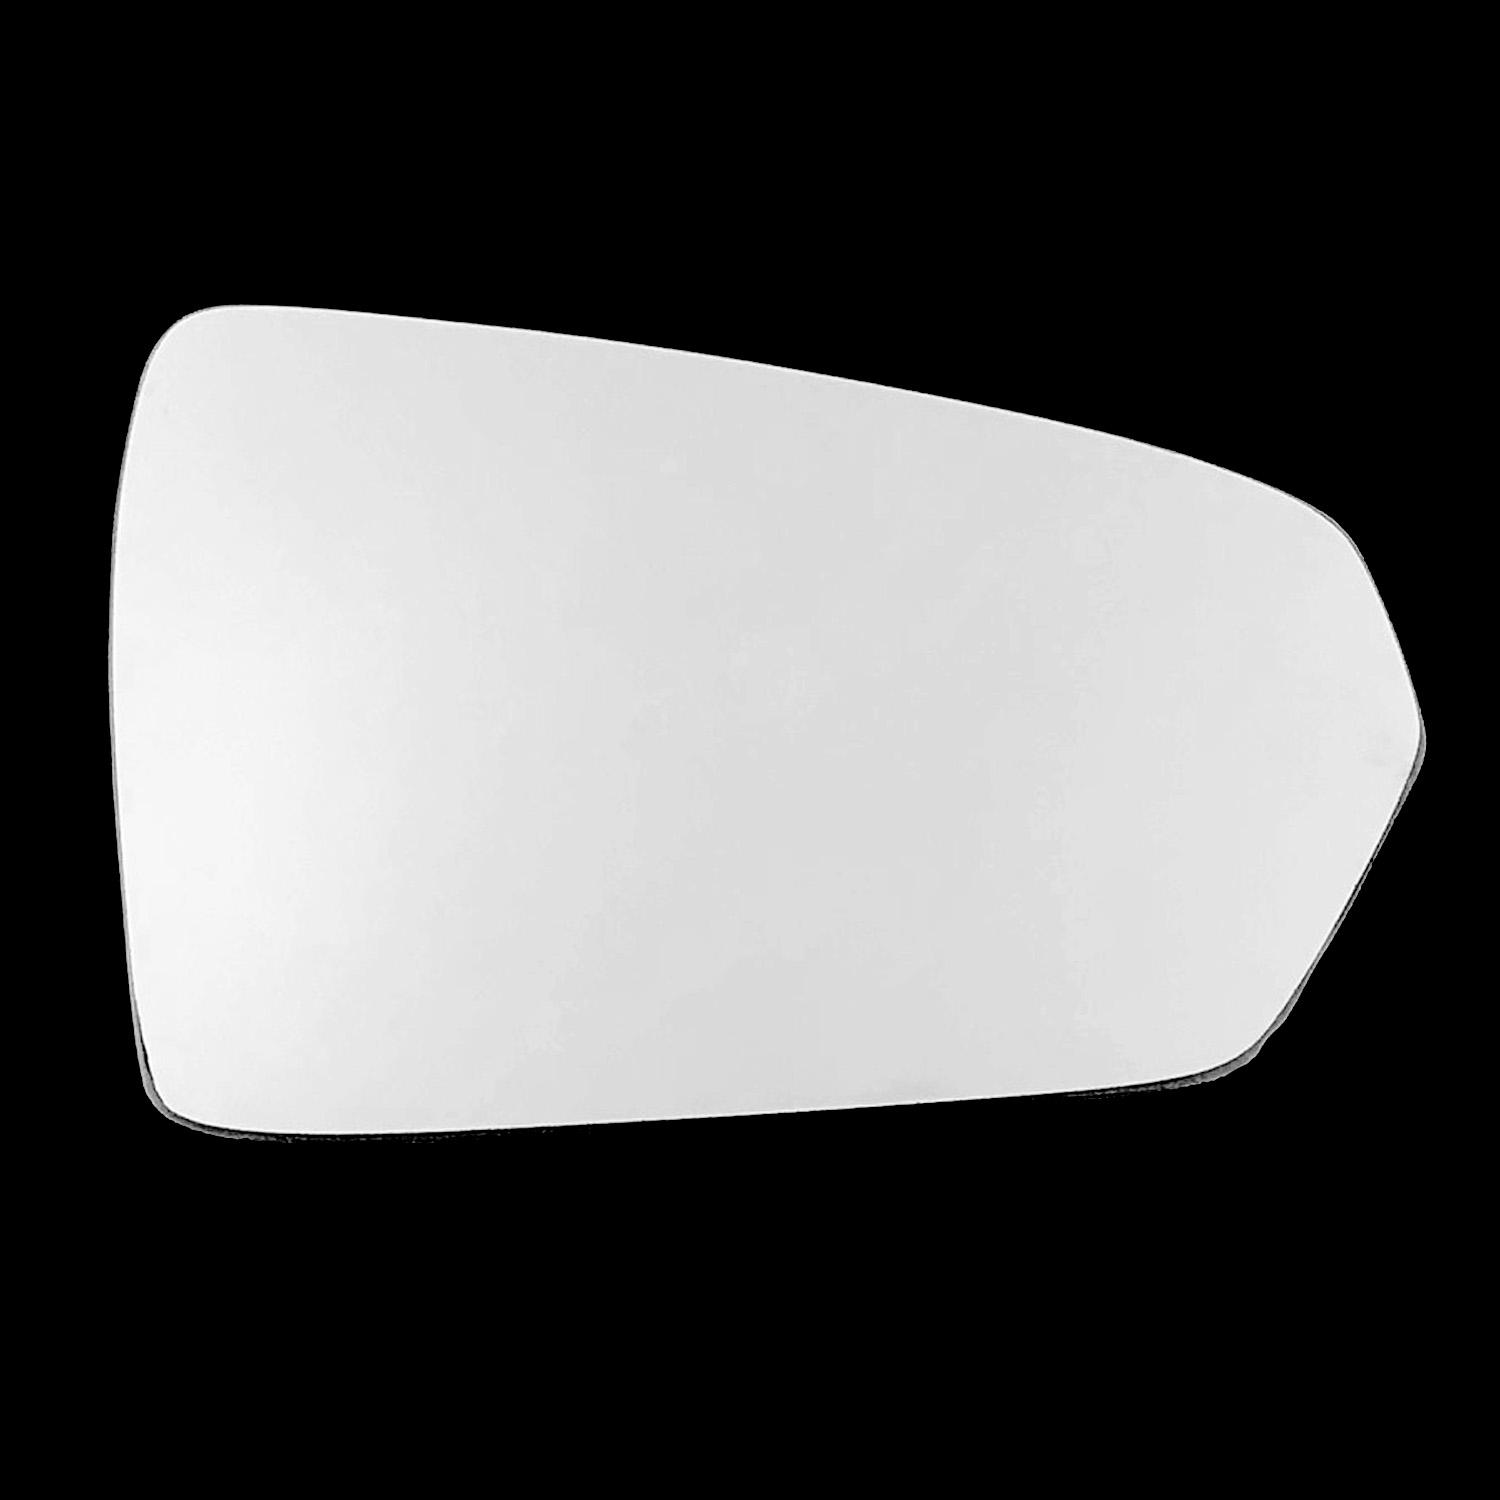 Volkswagen Polo Wing Mirror Glass RIGHT HAND ( UK Driver Side ) 2017 to 2020 ( MK6 ) – Wide Angle Wing Mirror